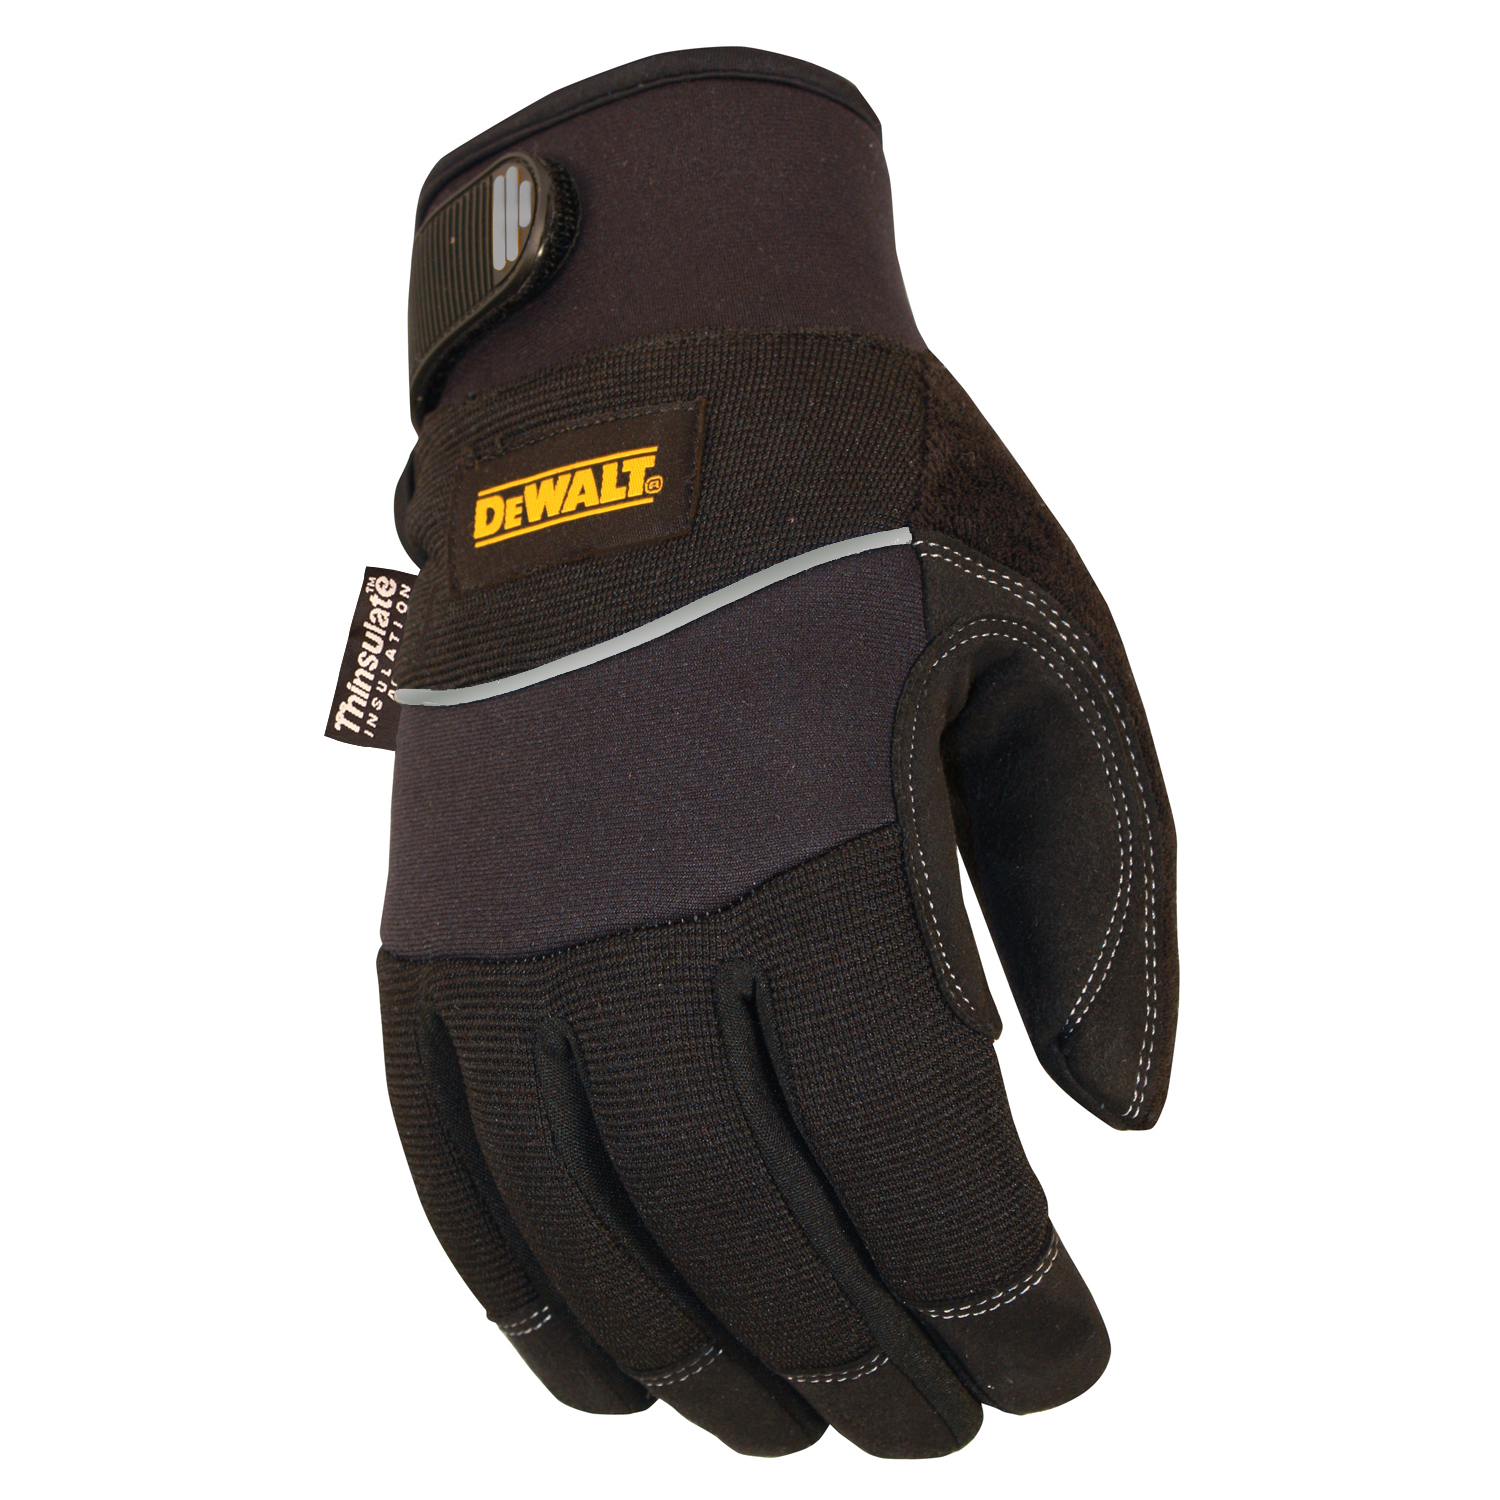 DPG755 Insulated Harsh Condition Work Glove - Size XL - Utility Gloves